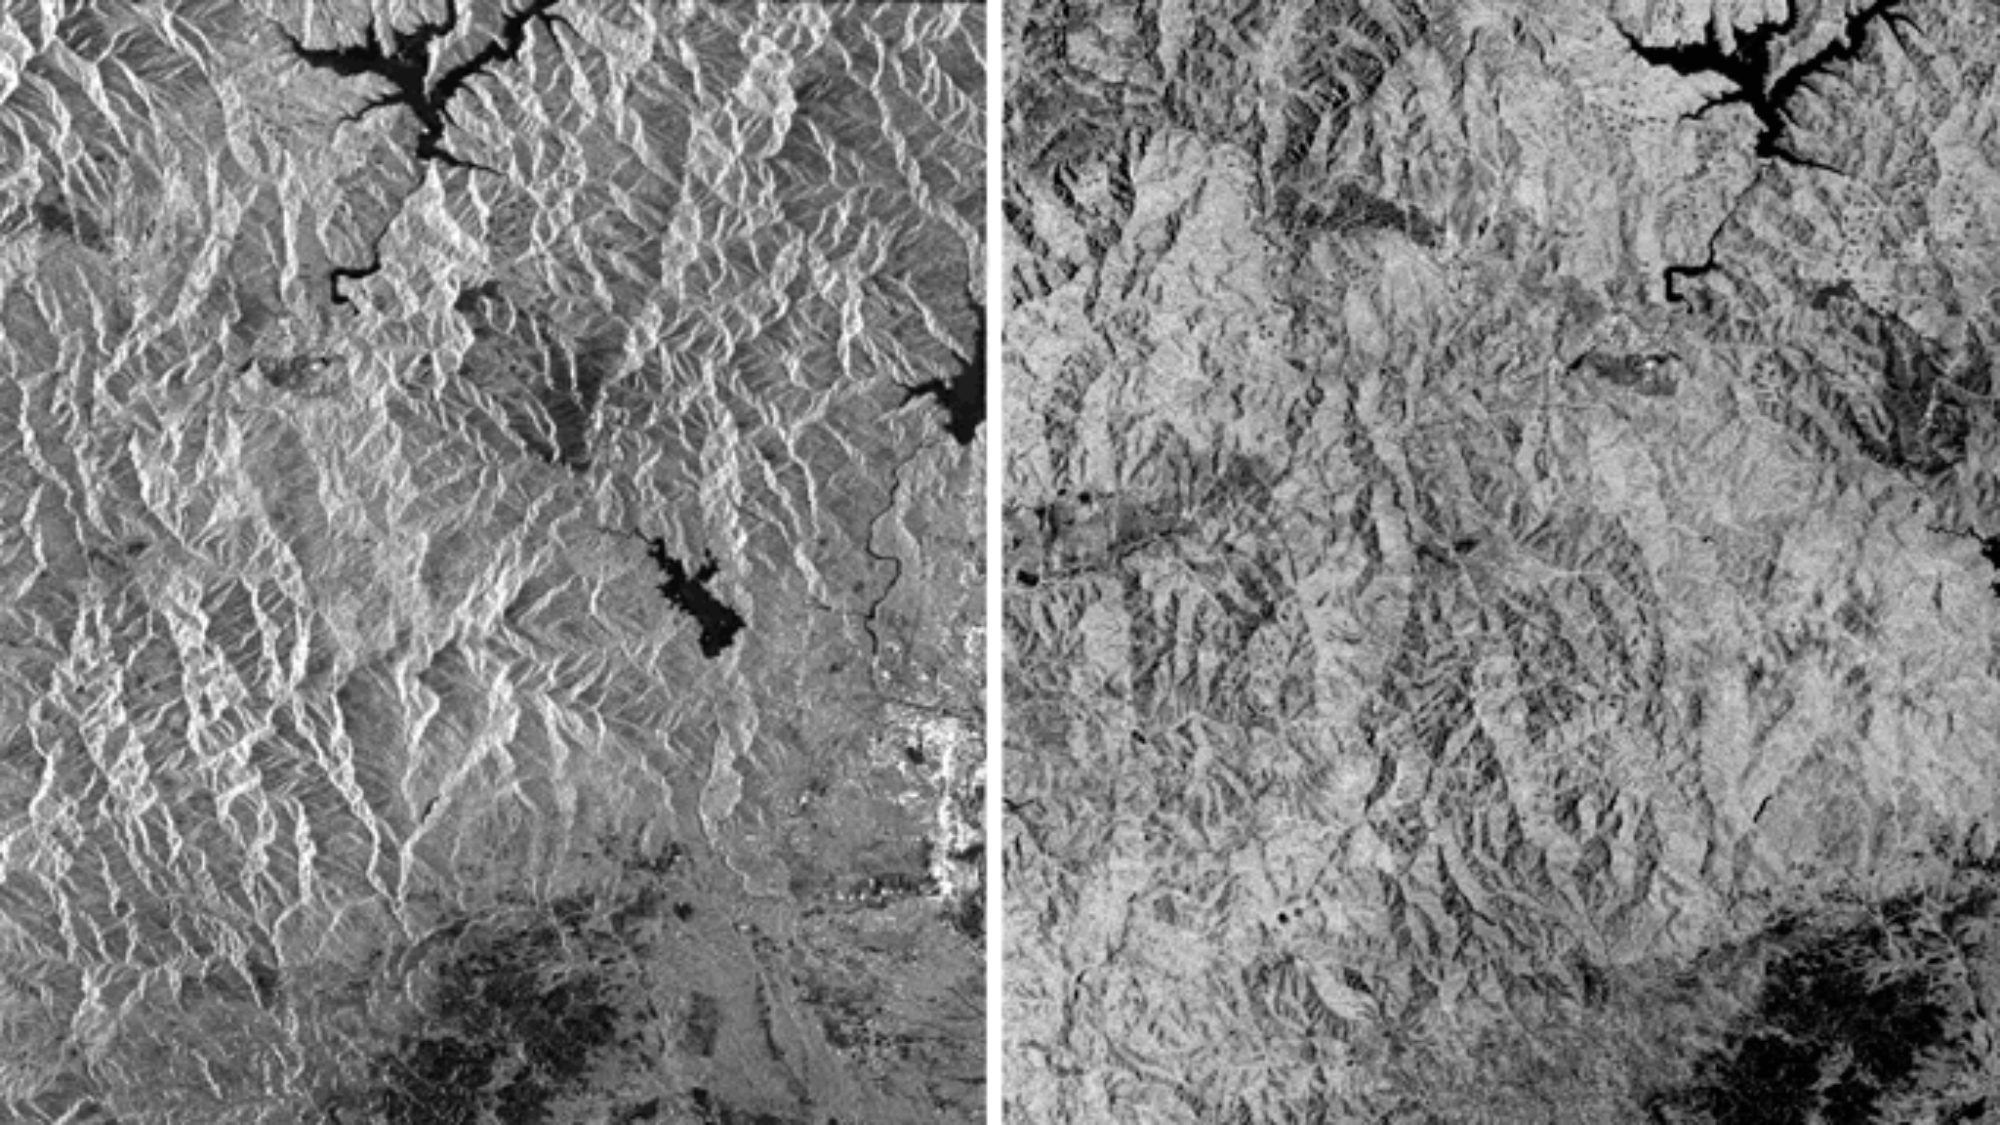 Before and after: Before radiometric terrain correction (RTC), Klamath Mountains in northern California appear stretched on one side and compressed on the other (left). RTC (right) moves pixels to unstretch the mountains and adjusts pixel values to subtract the effect of slopes on brightness. Left: © JAXA/METI 2008; right: ASF DAAC 2016; Includes Material © JAXA/METI 2008.